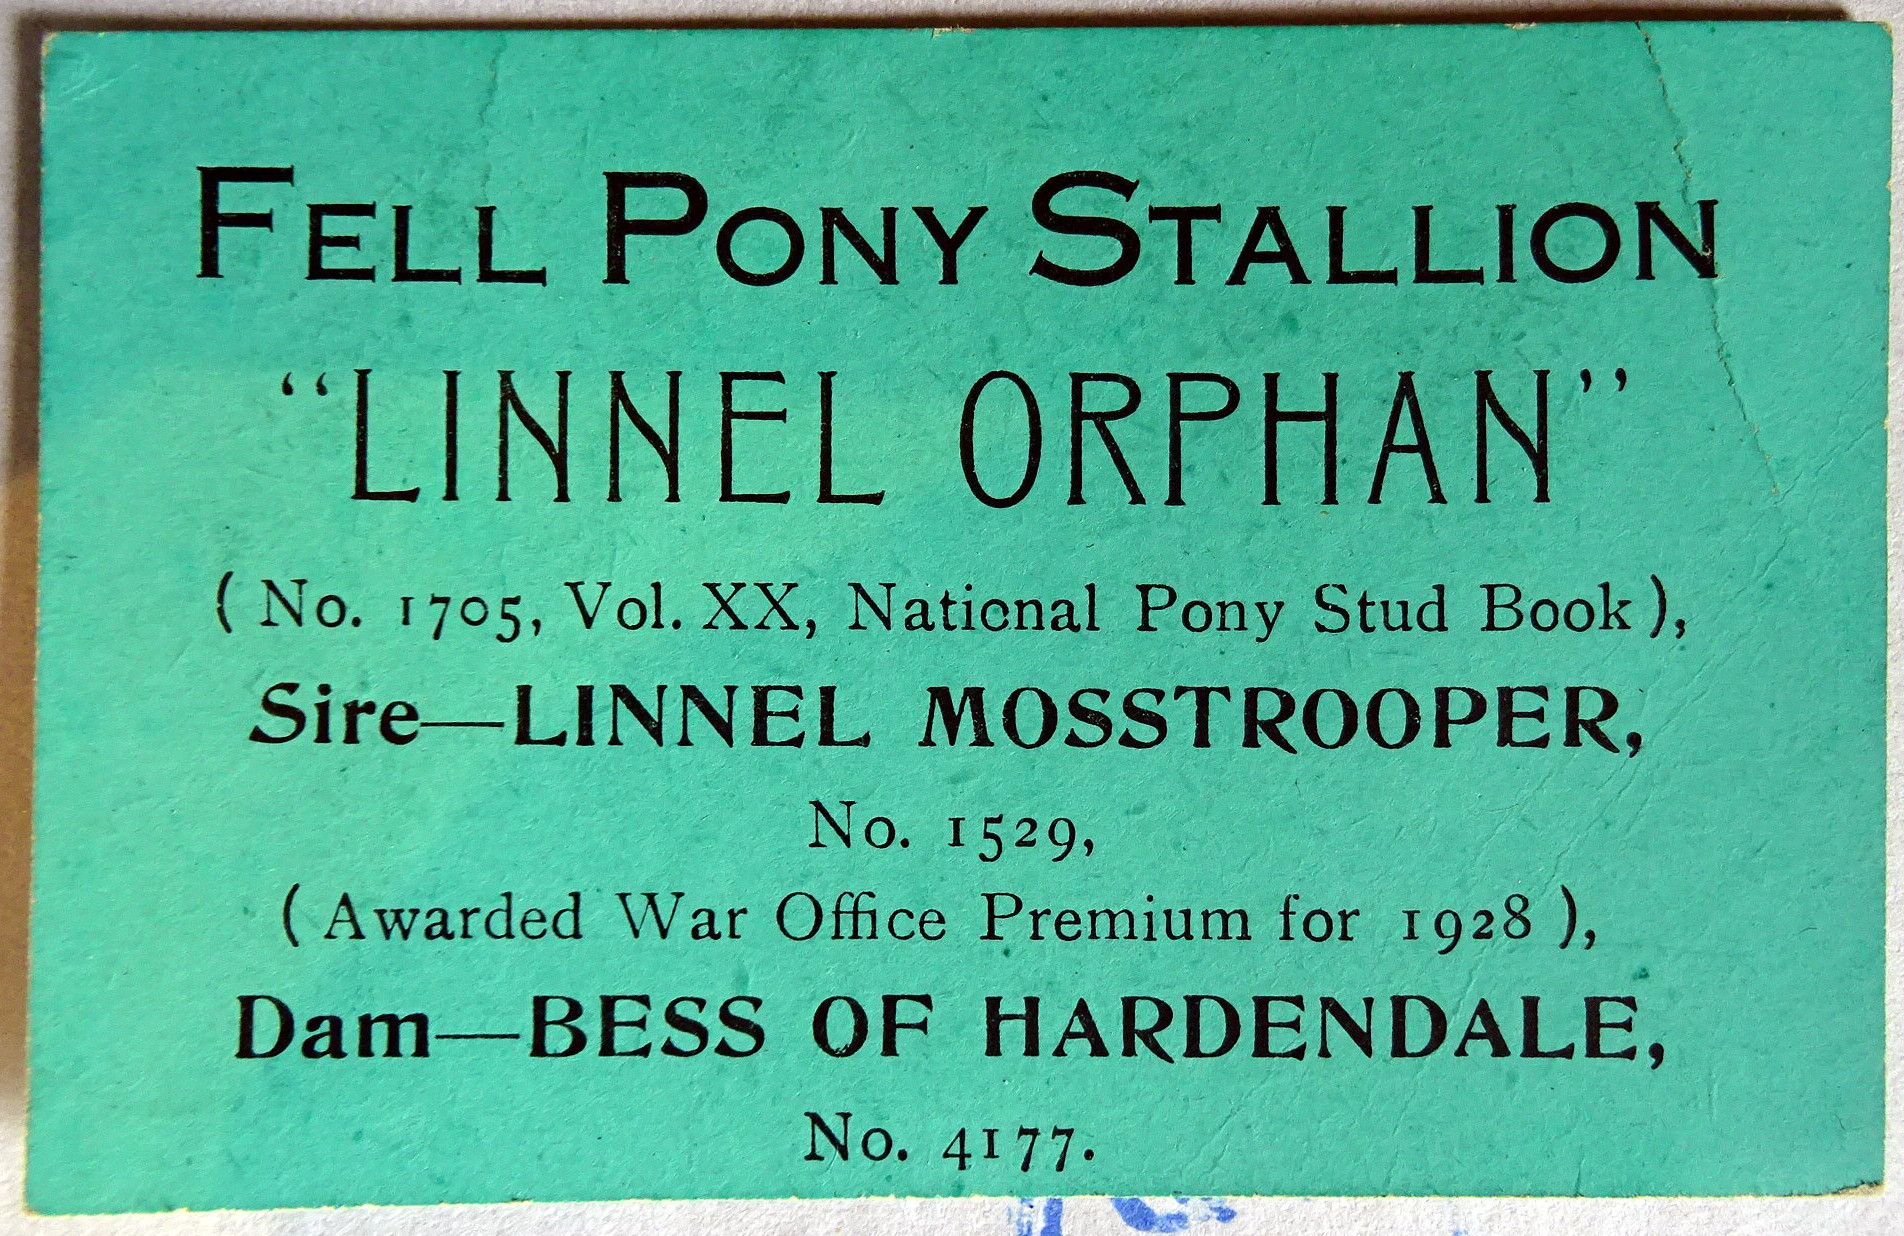 a card from 1928 advertising a stallion